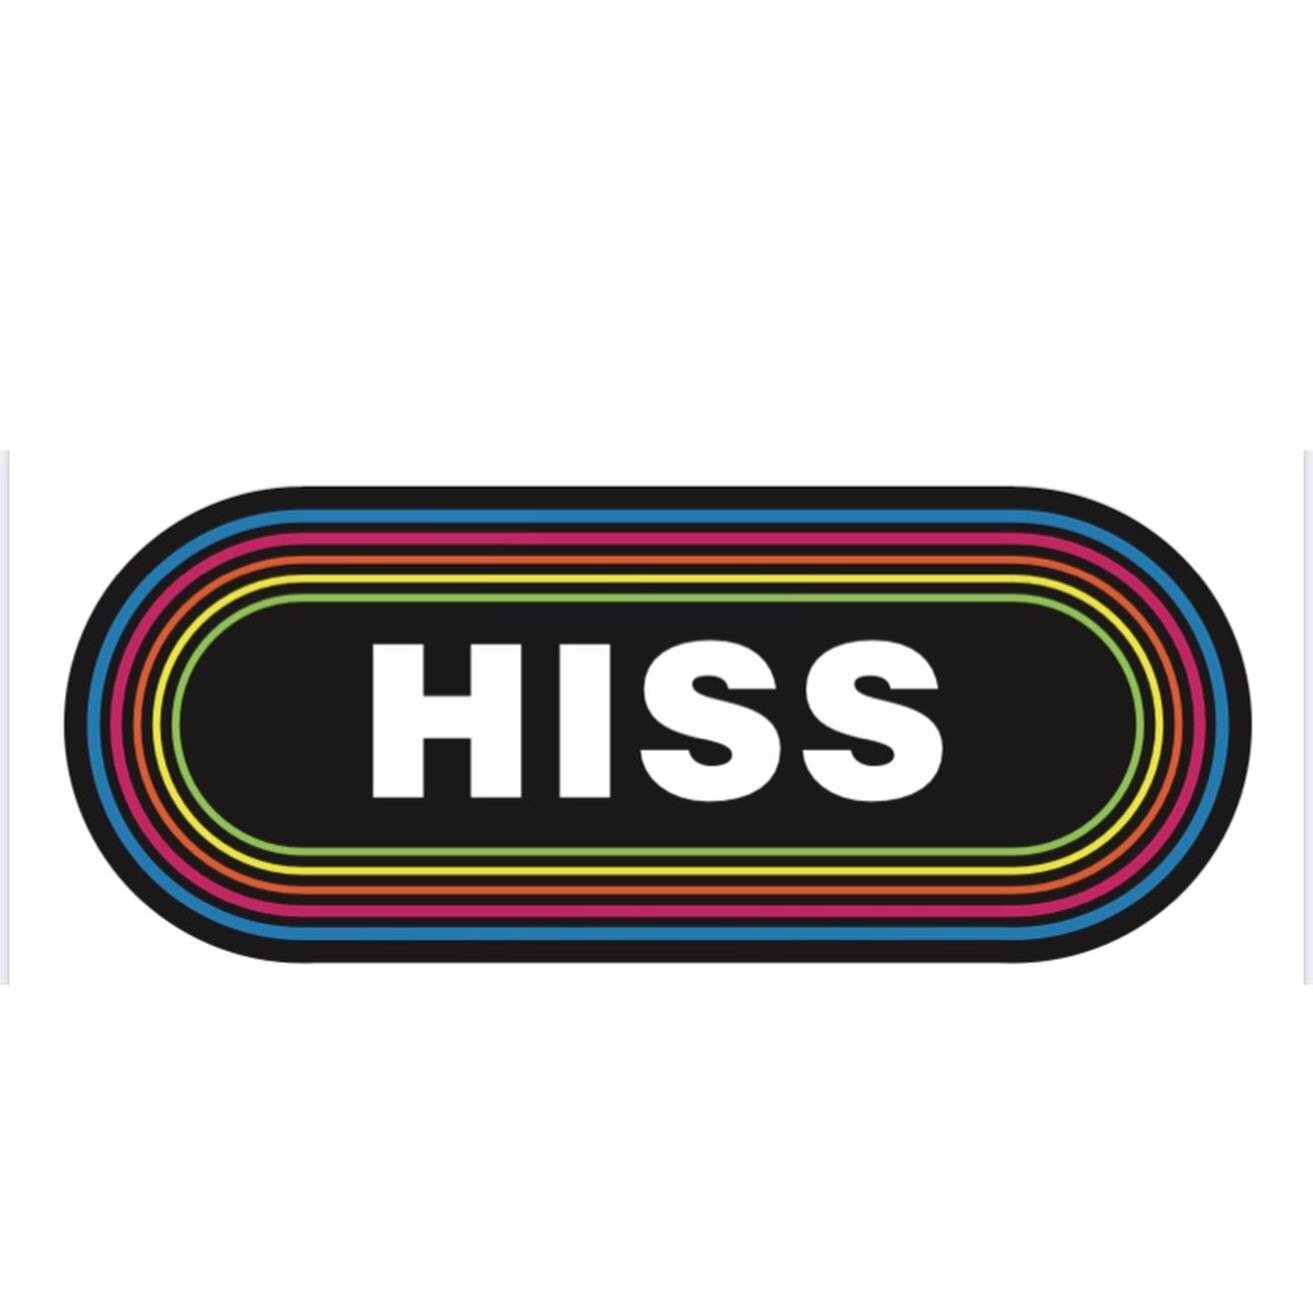 The most fun way to hear about the big old news we&rsquo;re announcing Monday is through my newsletter &ldquo;The Kitchen Table Speculator.&rdquo; Sign yourself up by entering the Hiss site and scrolling to the bottom. Easy peasy, folks. I promise I 